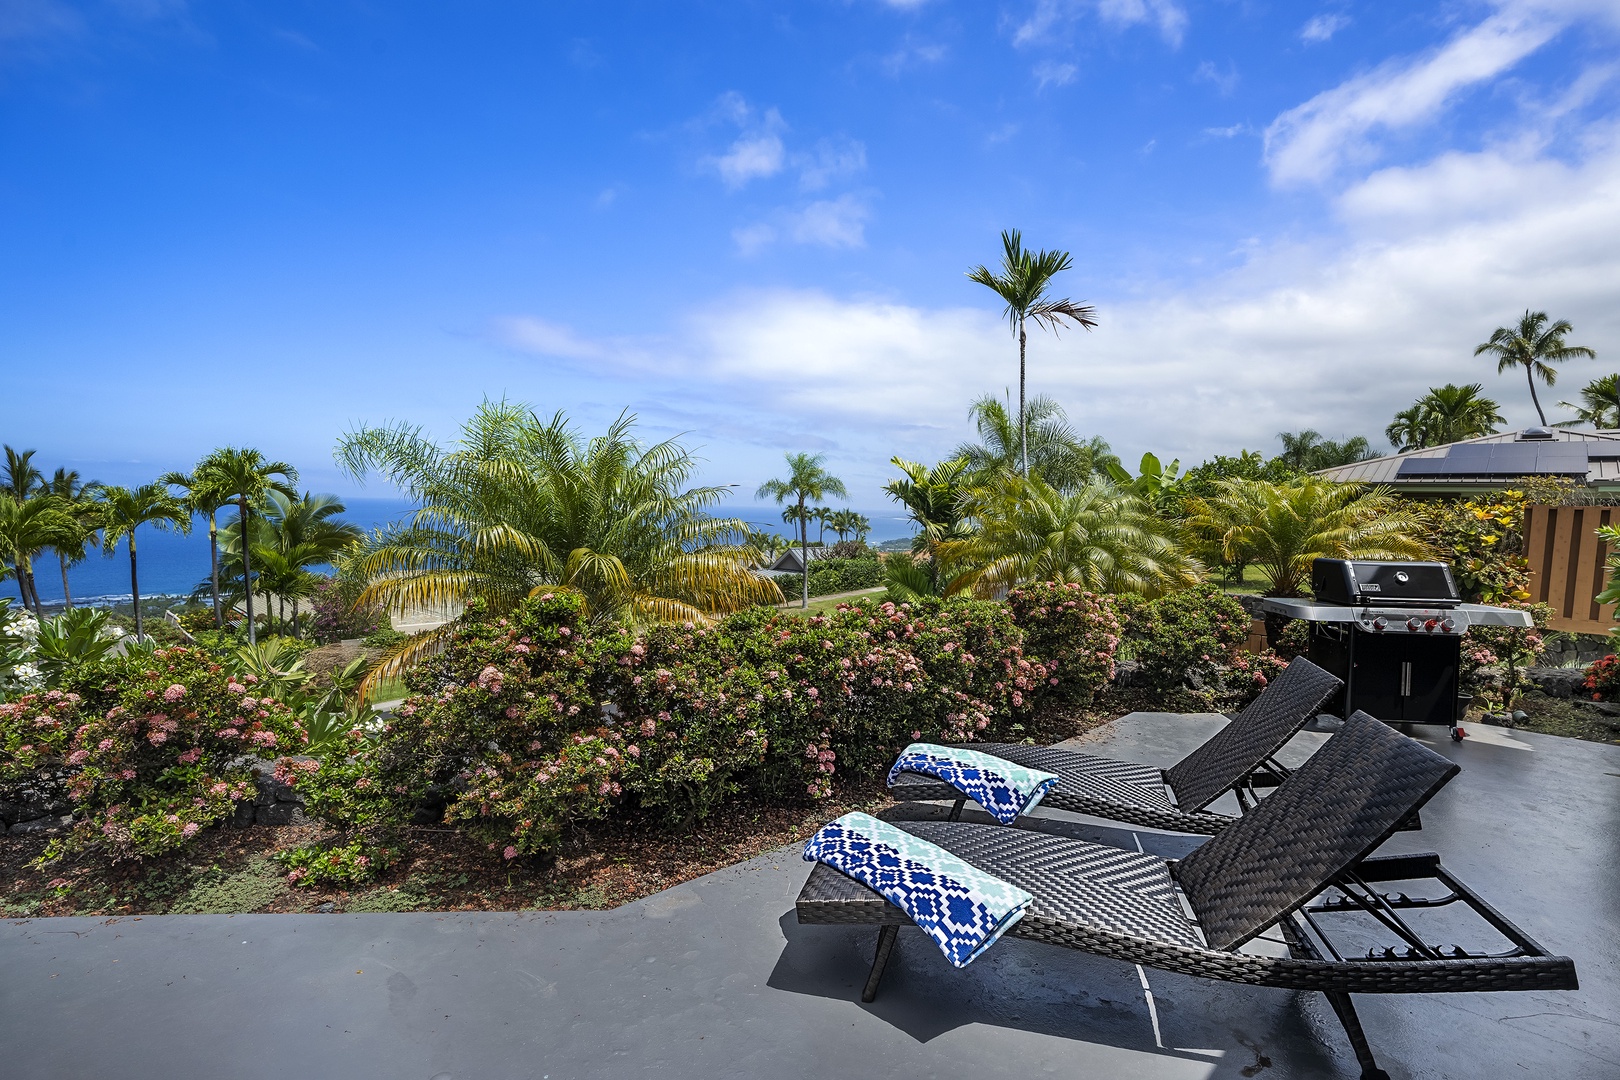 Kailua Kona Vacation Rentals, Pineapple House - Lounge and listen to the bird and waves crash in the distance